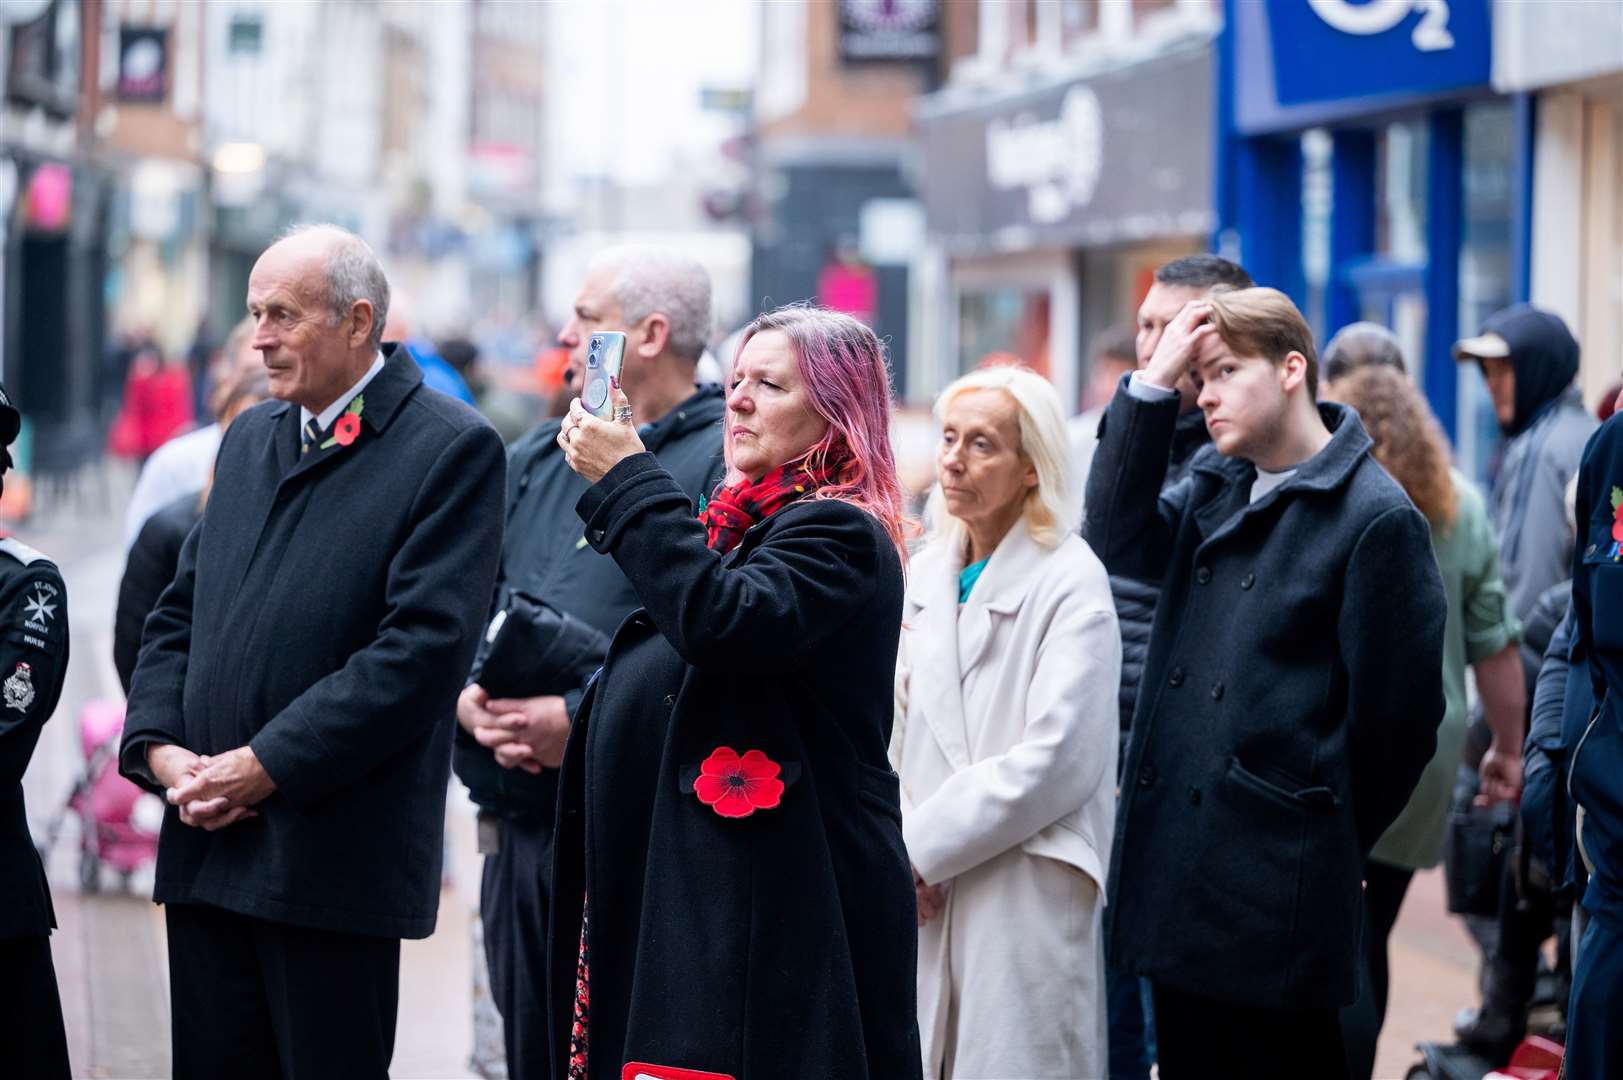 Many came together for Lynn's poppy appeal launch. Picture: Ian Burt